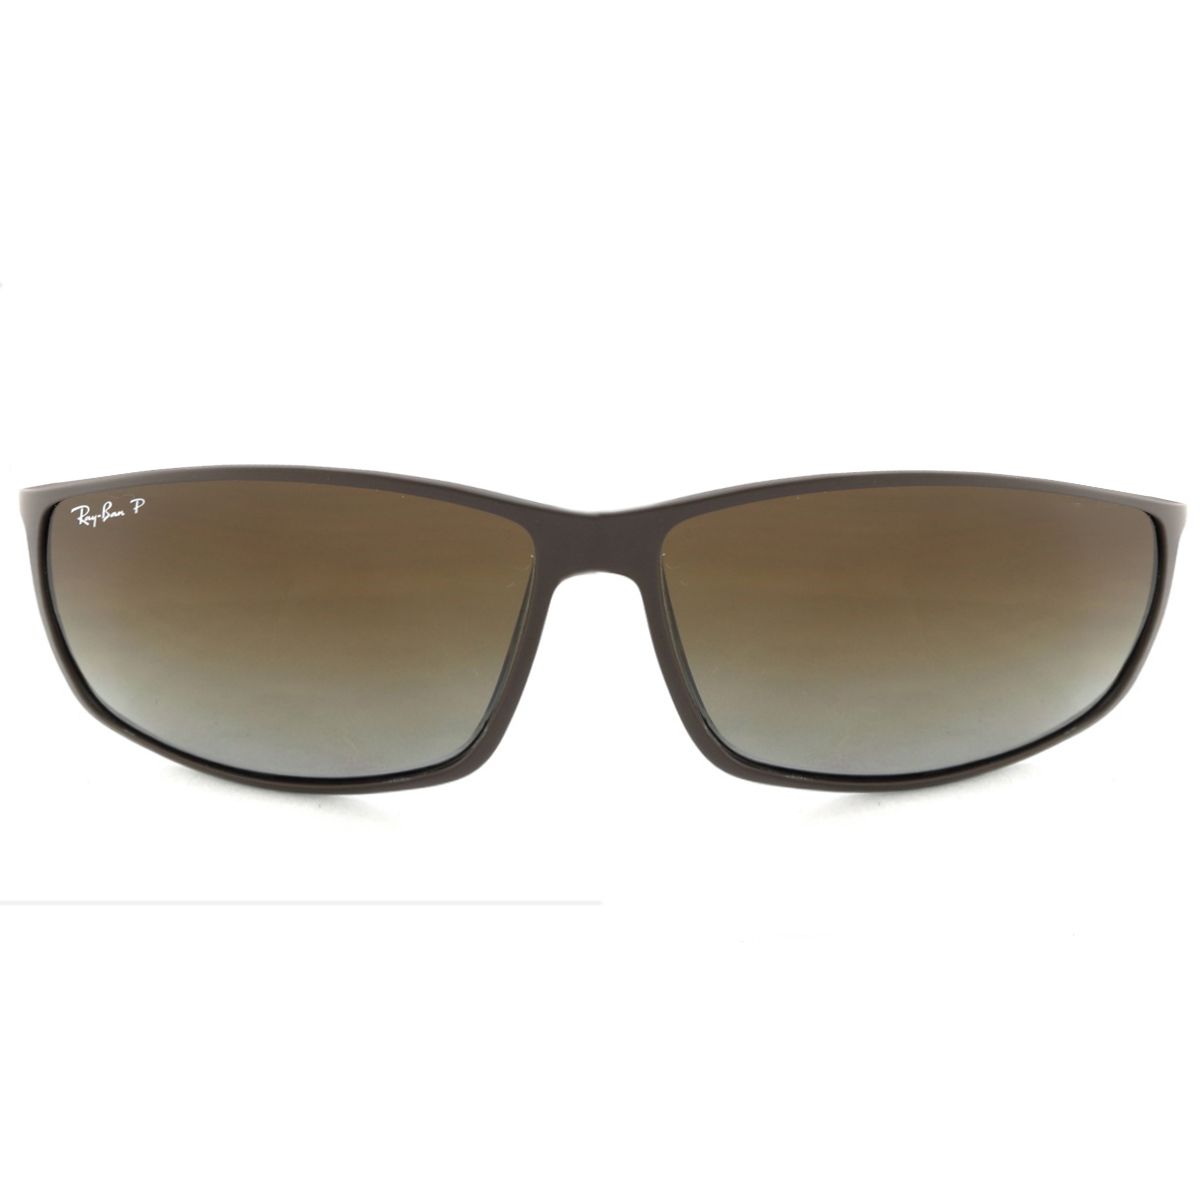 RB4179 Oval Sunglasses 601S 9A - size 62